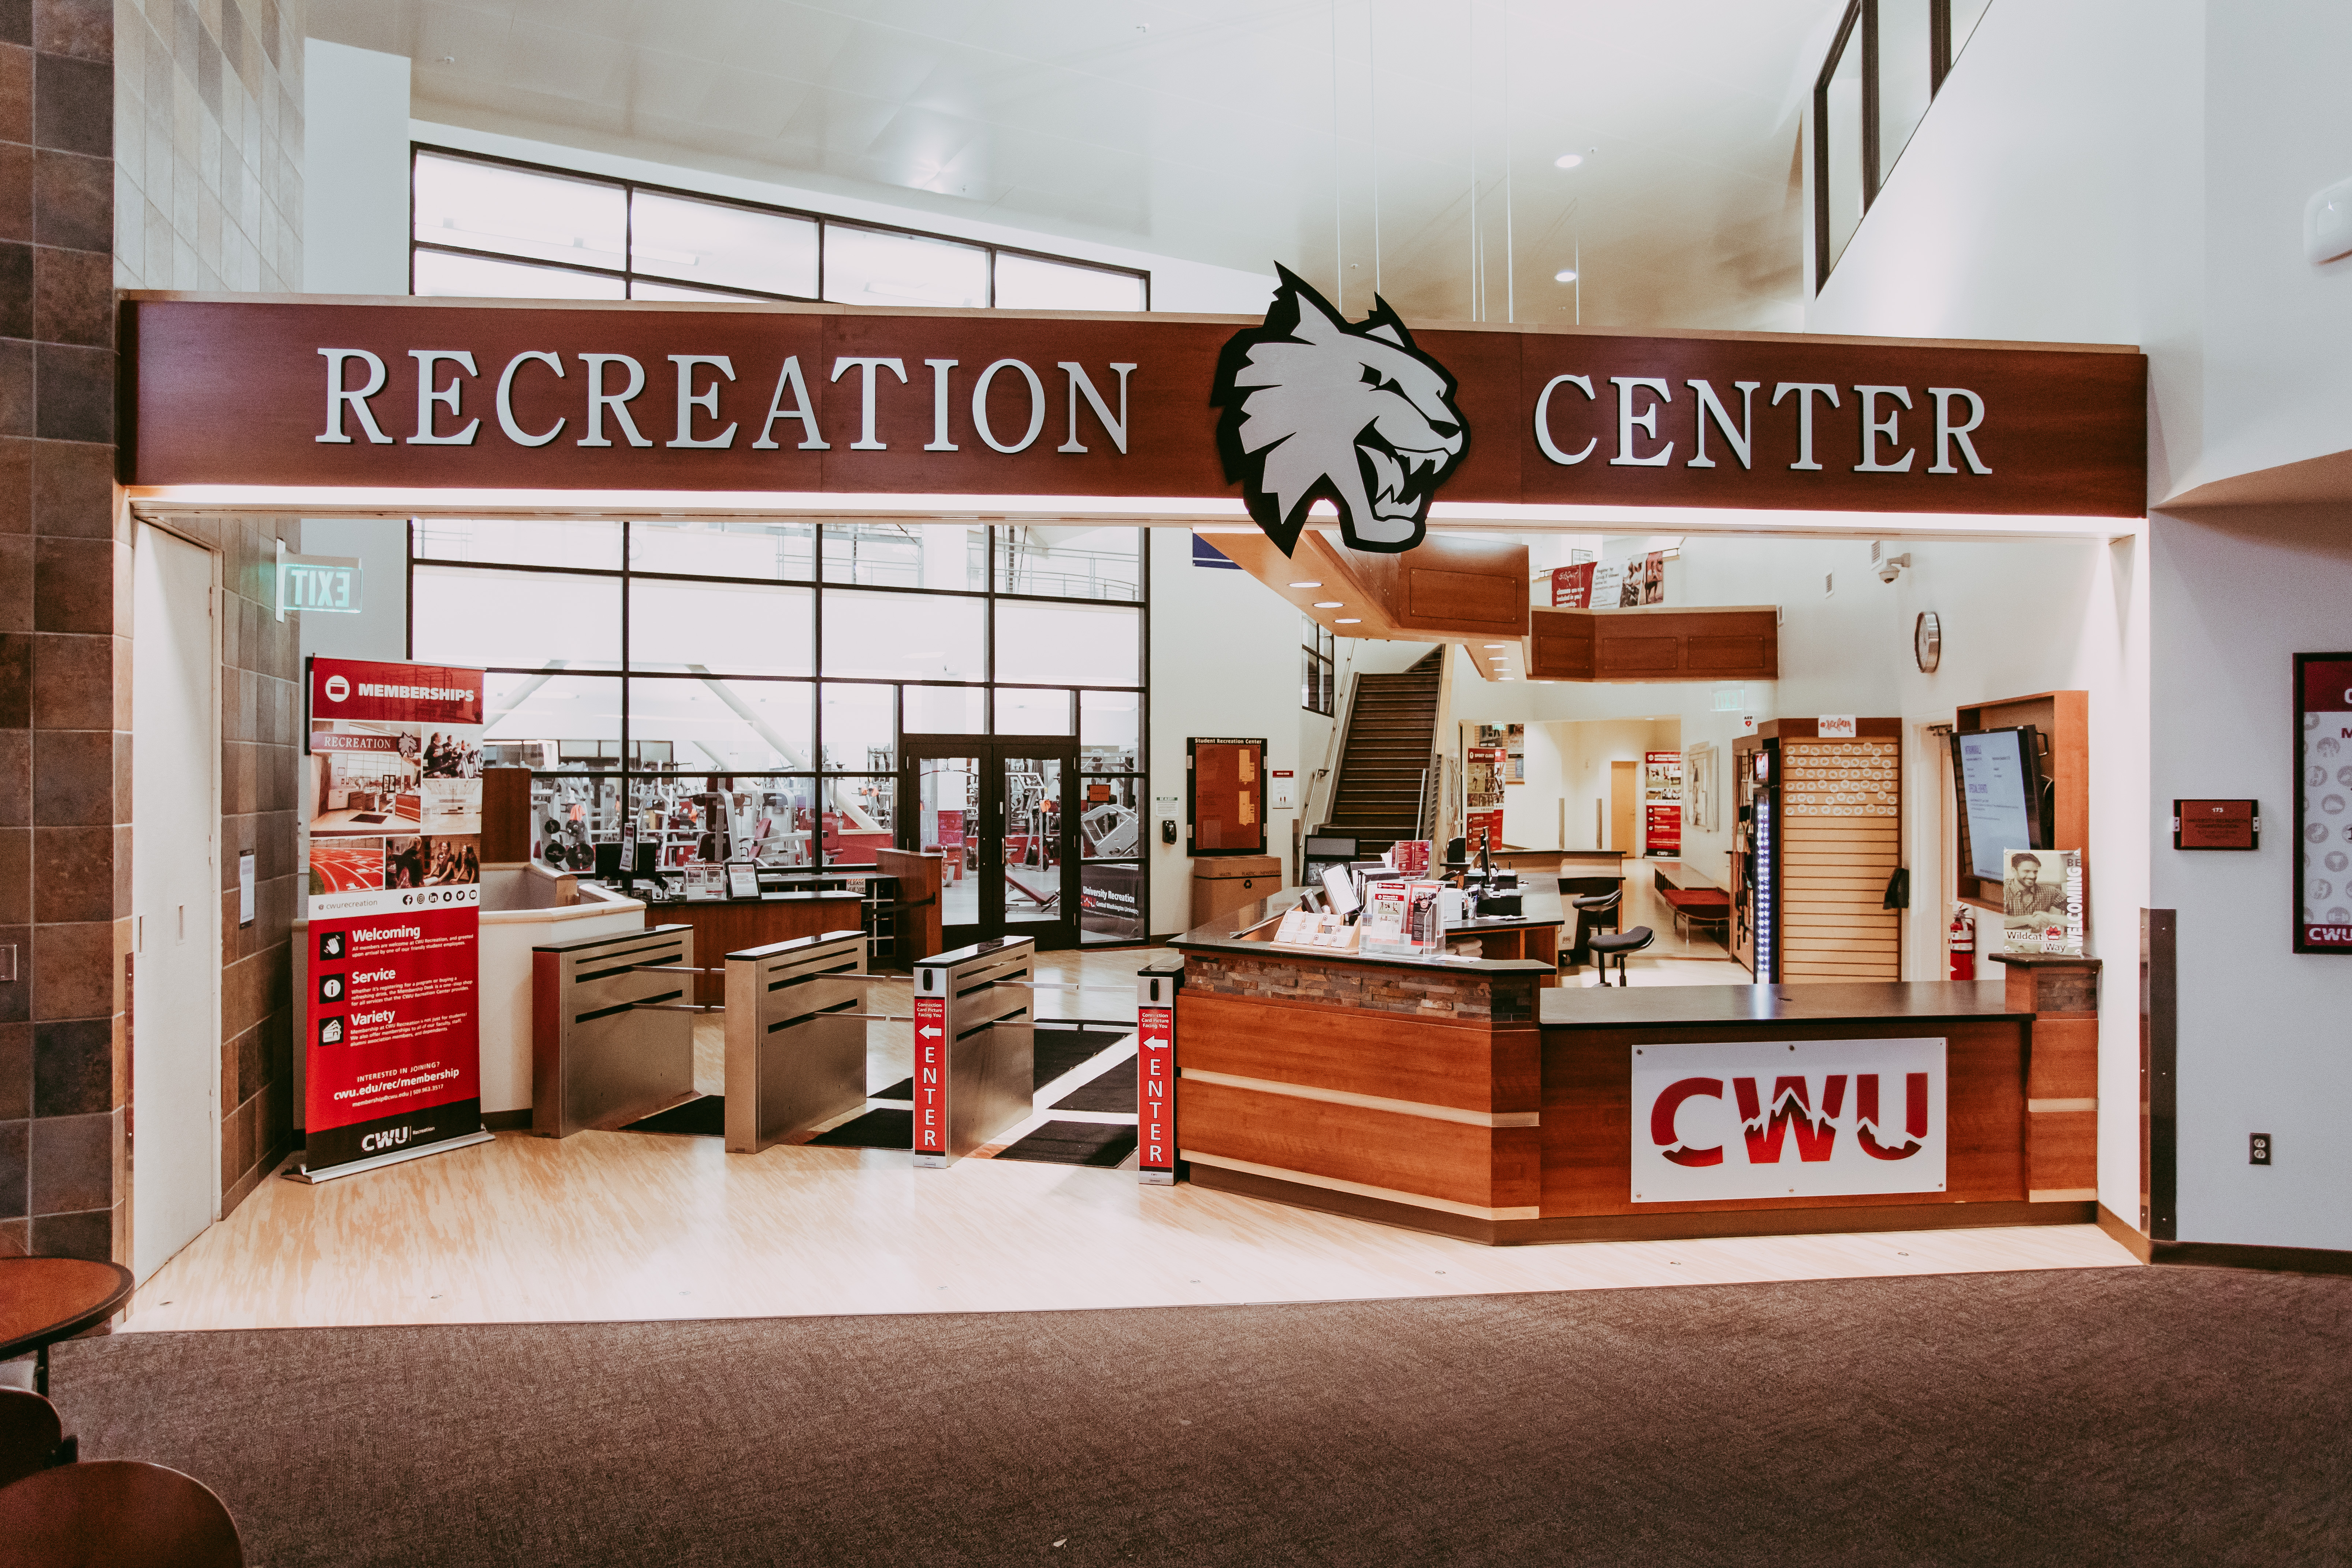 An image of the recreation center at CWU. There is a front desk and terminal to swipe your student card before entering. In the back there is a weight room and a staircase. Above the front desk there is a big sign that has the Wildcat logo and the words "RECREATION CENTER".